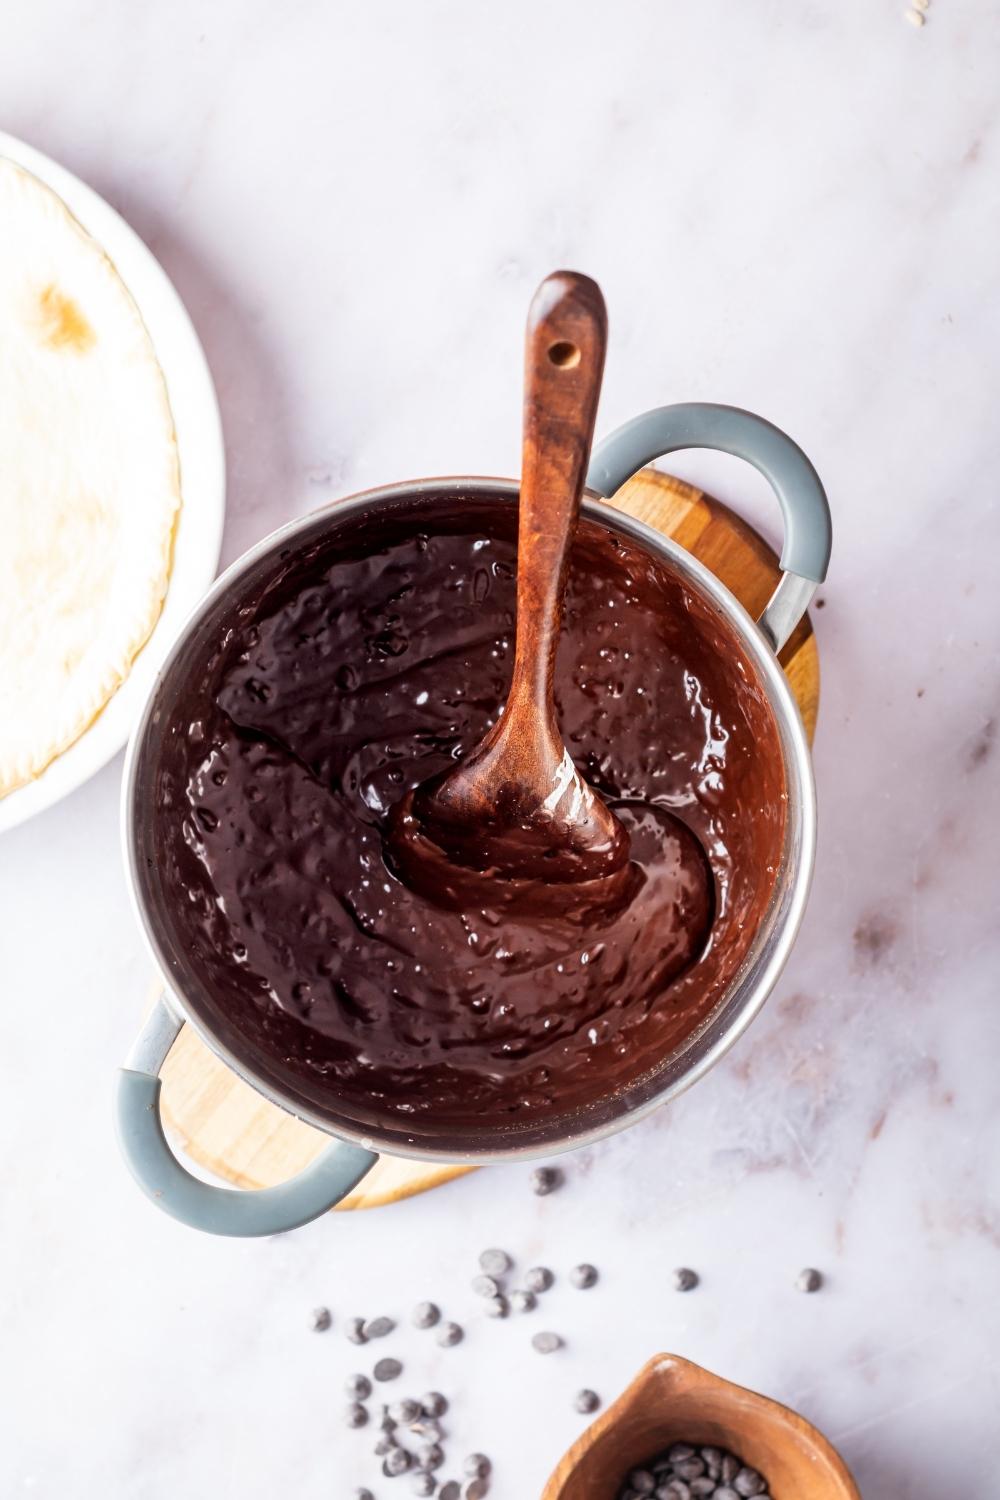 Chocolate pudding in a pot with a wooden spoon.